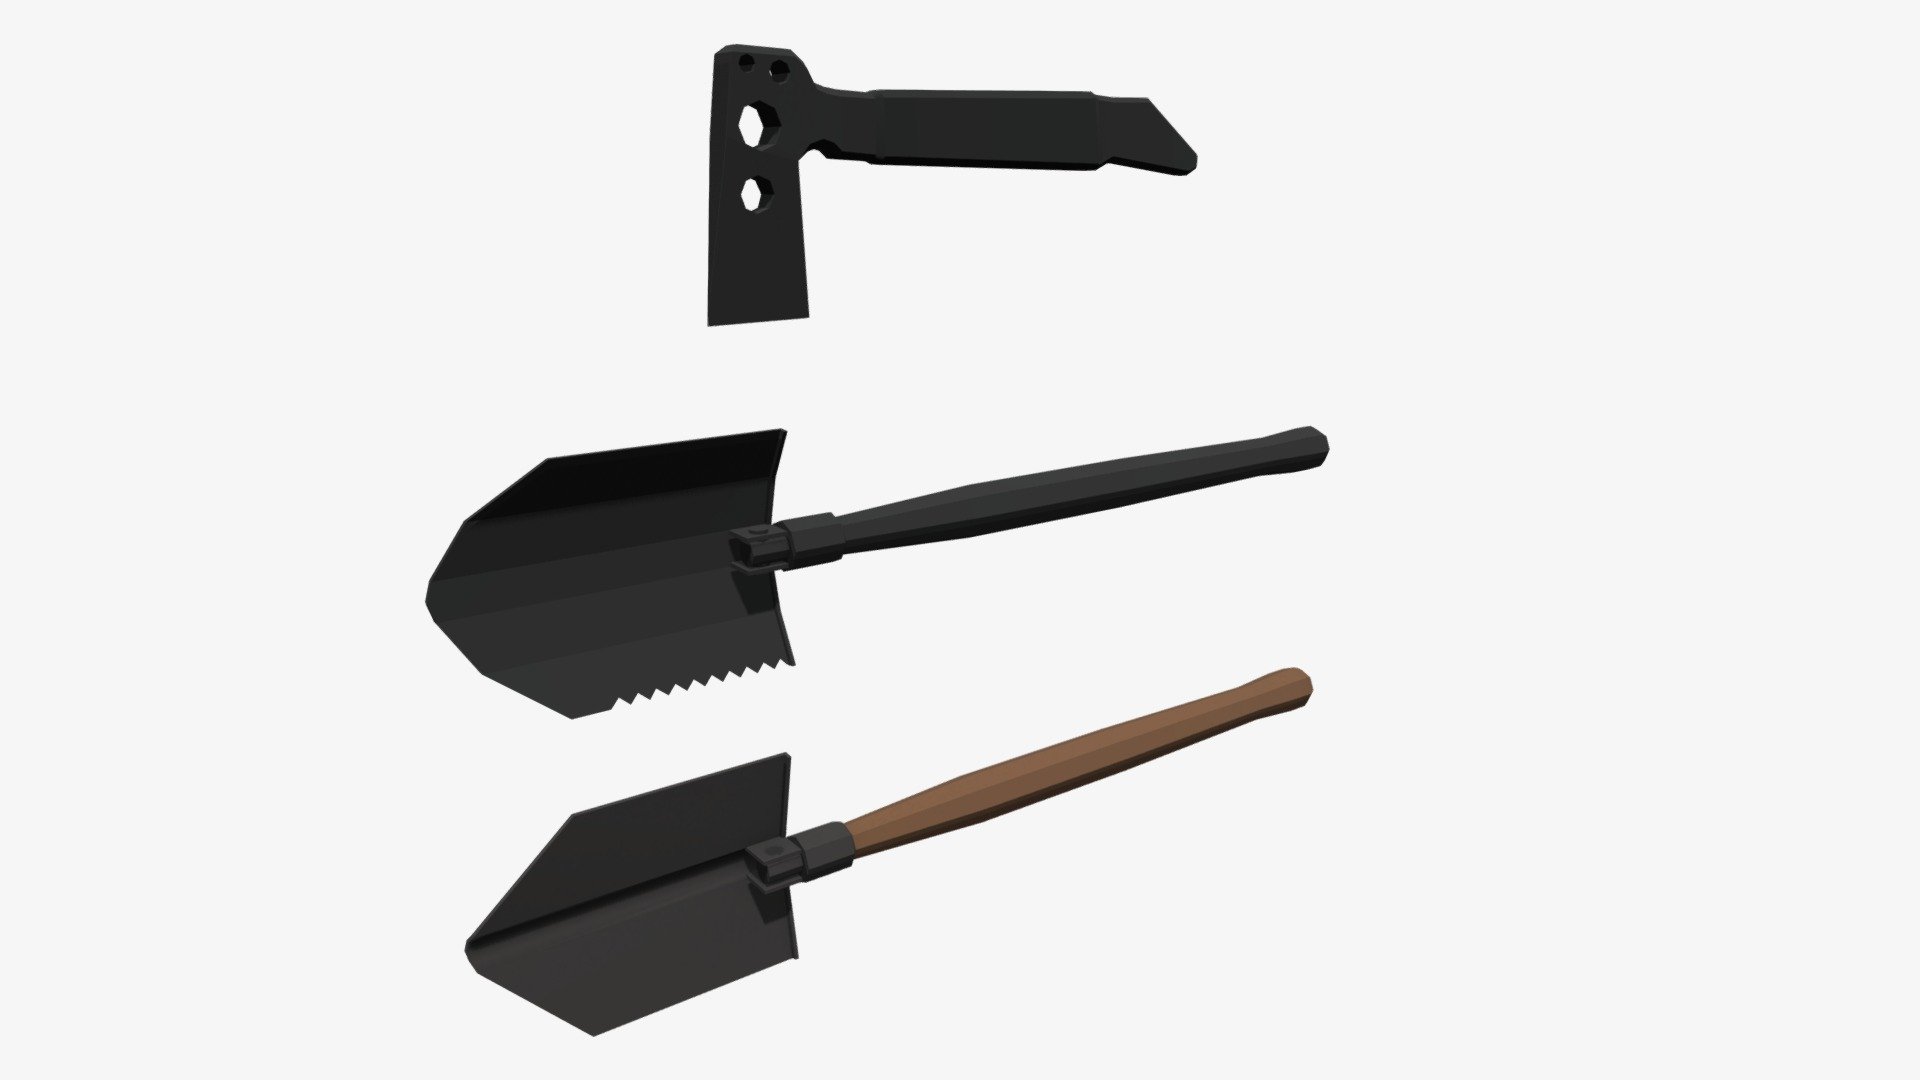 Models of a classic folding shovel, modern military entrenching tool and a combat axe or tomahawk 3d model